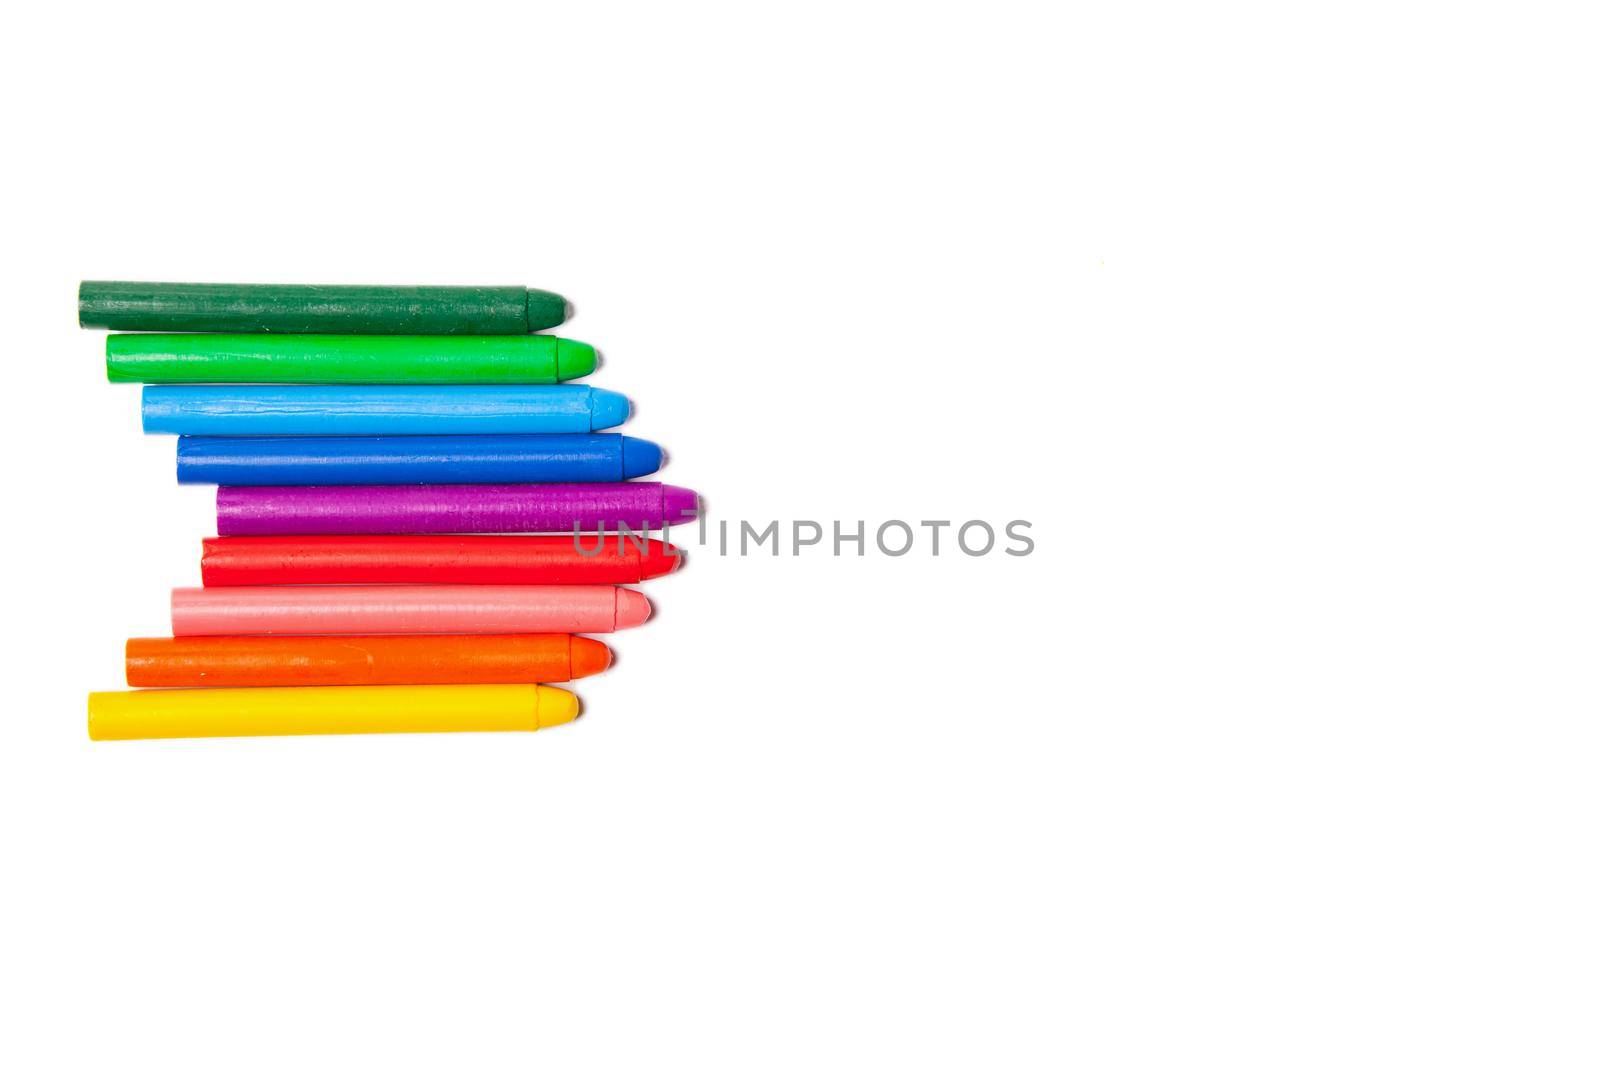 Crayons lined up in rainbow by Julenochek